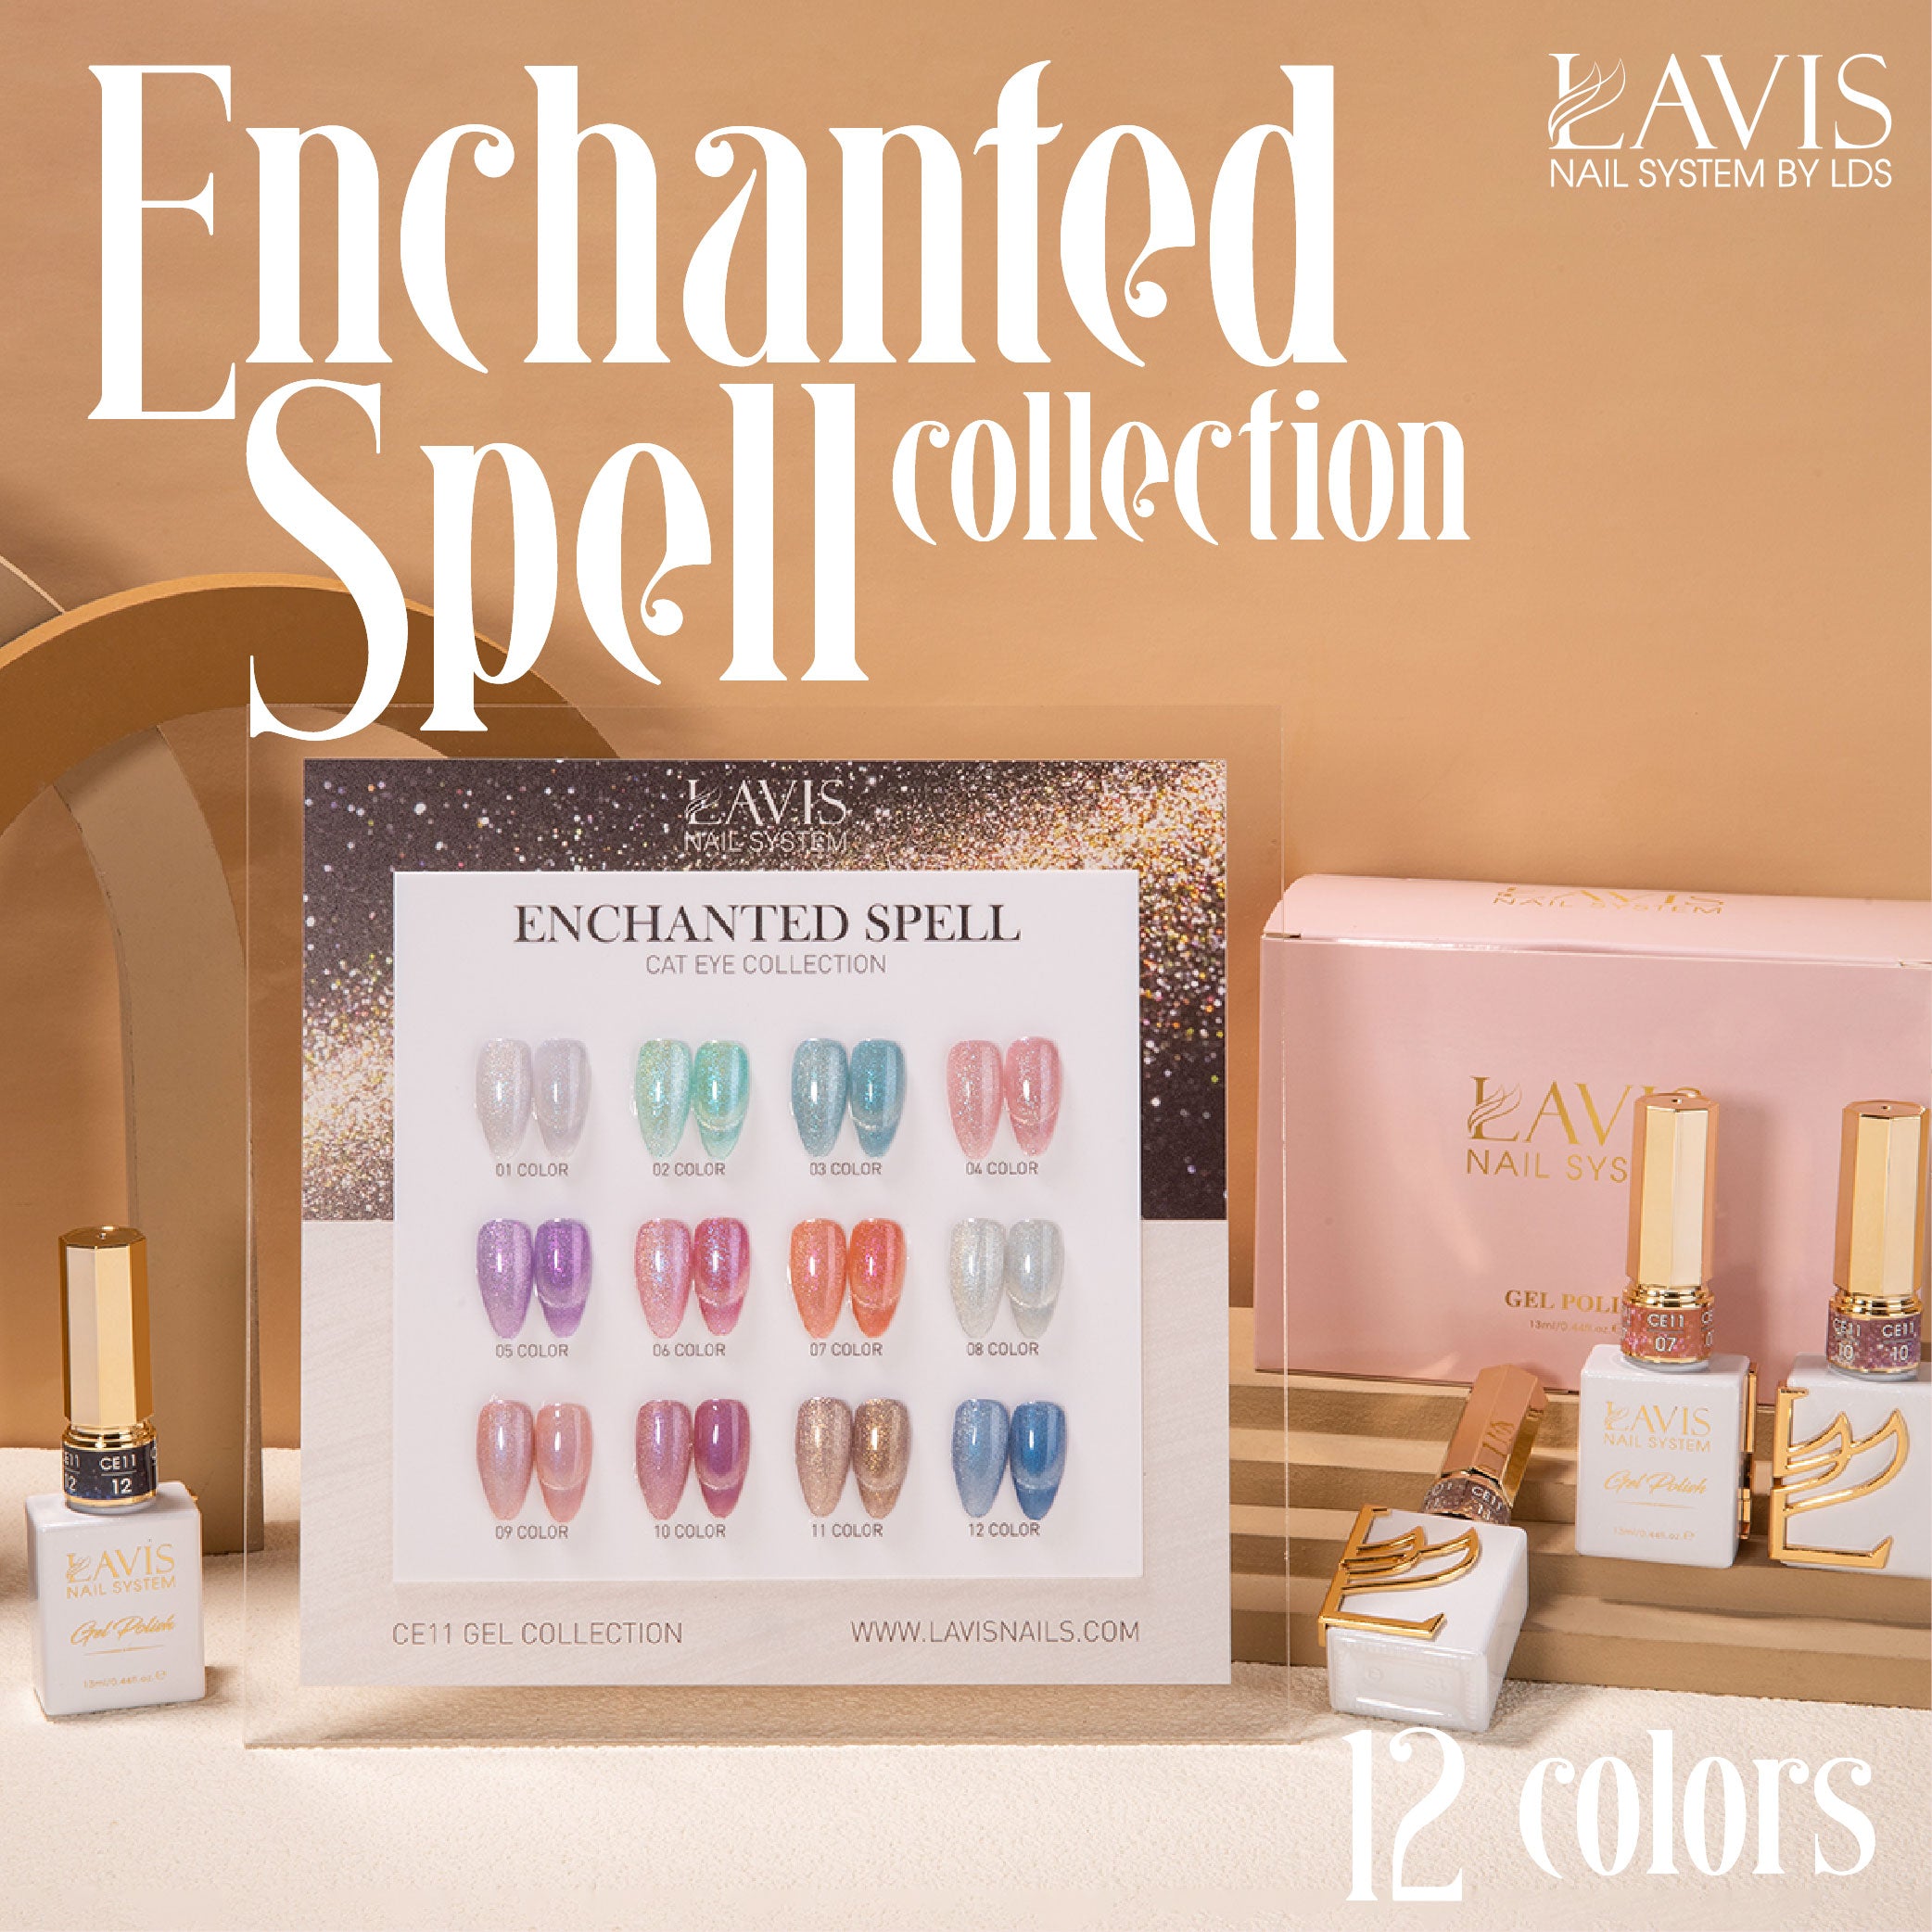 LAVIS Cat Eyes CE11 - 05 - Gel Polish 0.5 oz - Enchanted Spell Collection